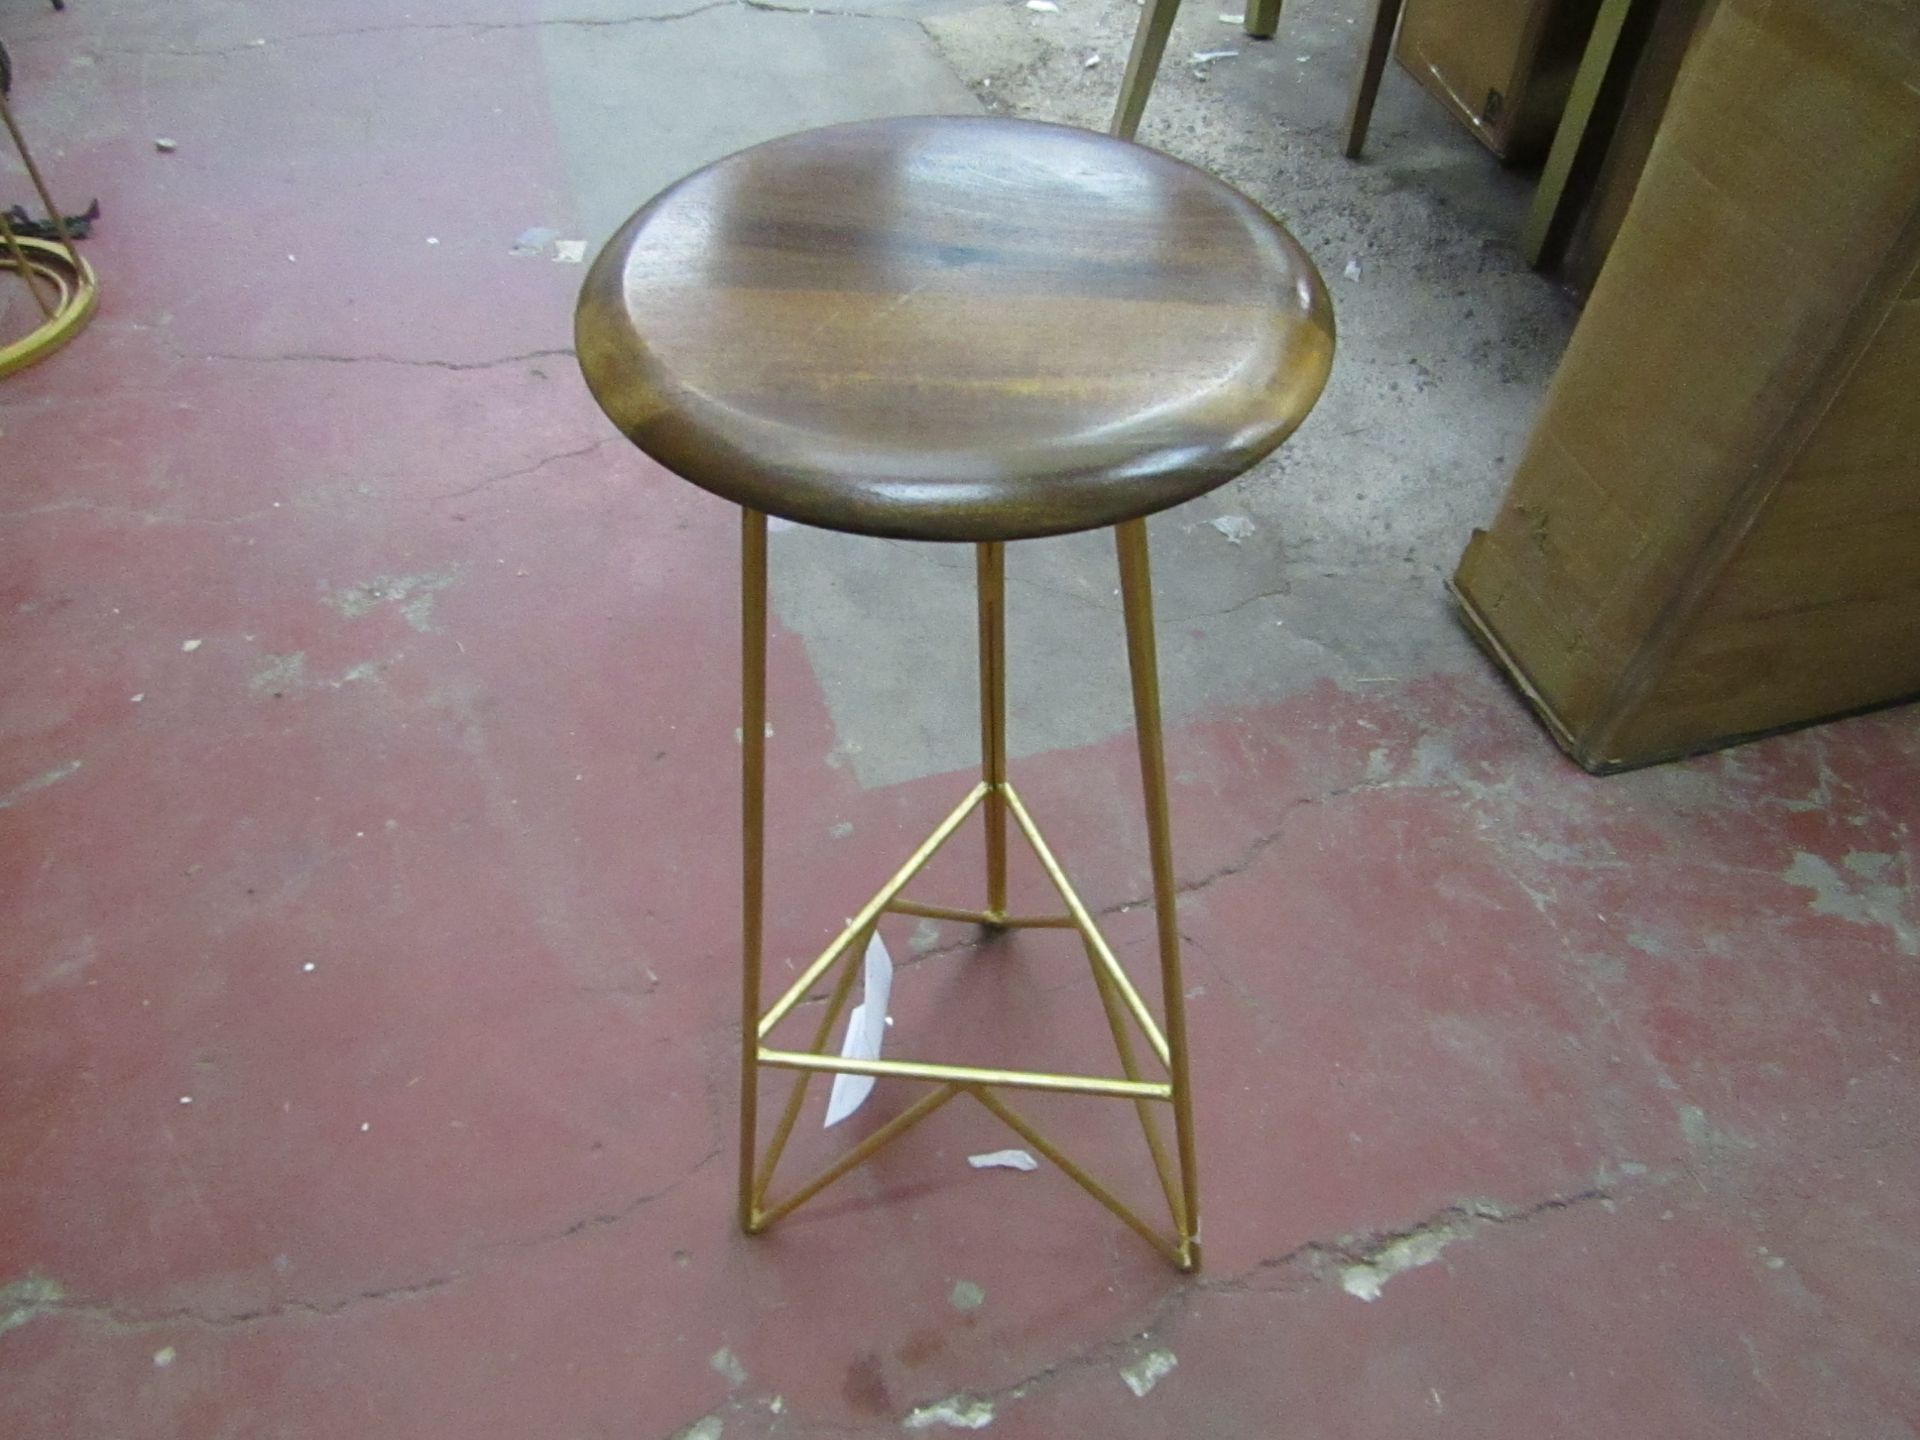 Swoon Kato Stool in Gold Leaf, with box, RRP £149, please read lot 0 before bidding - Image 2 of 2